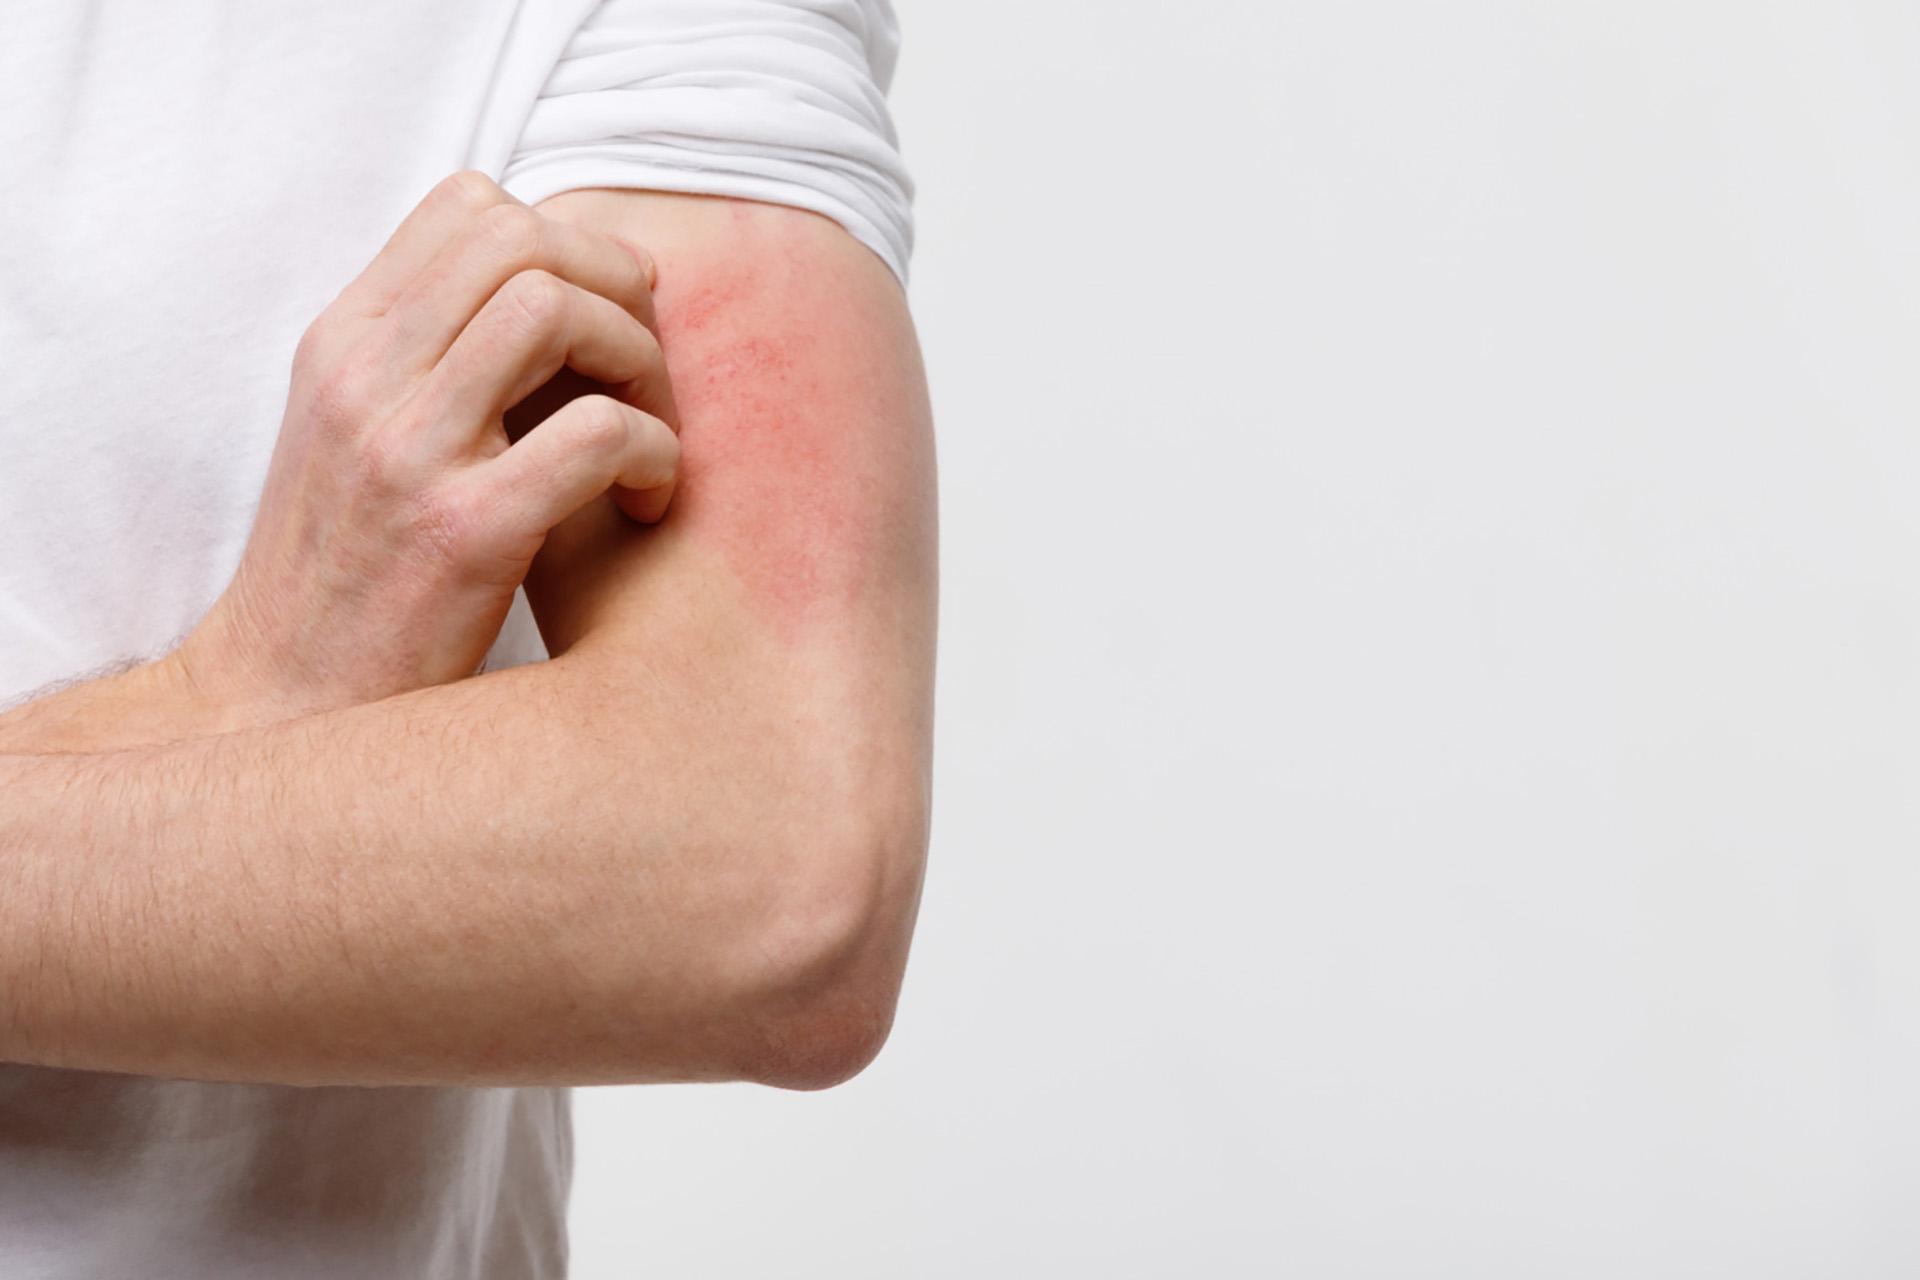 Staph Infection Treatment: 4 Key Things You Need to Know